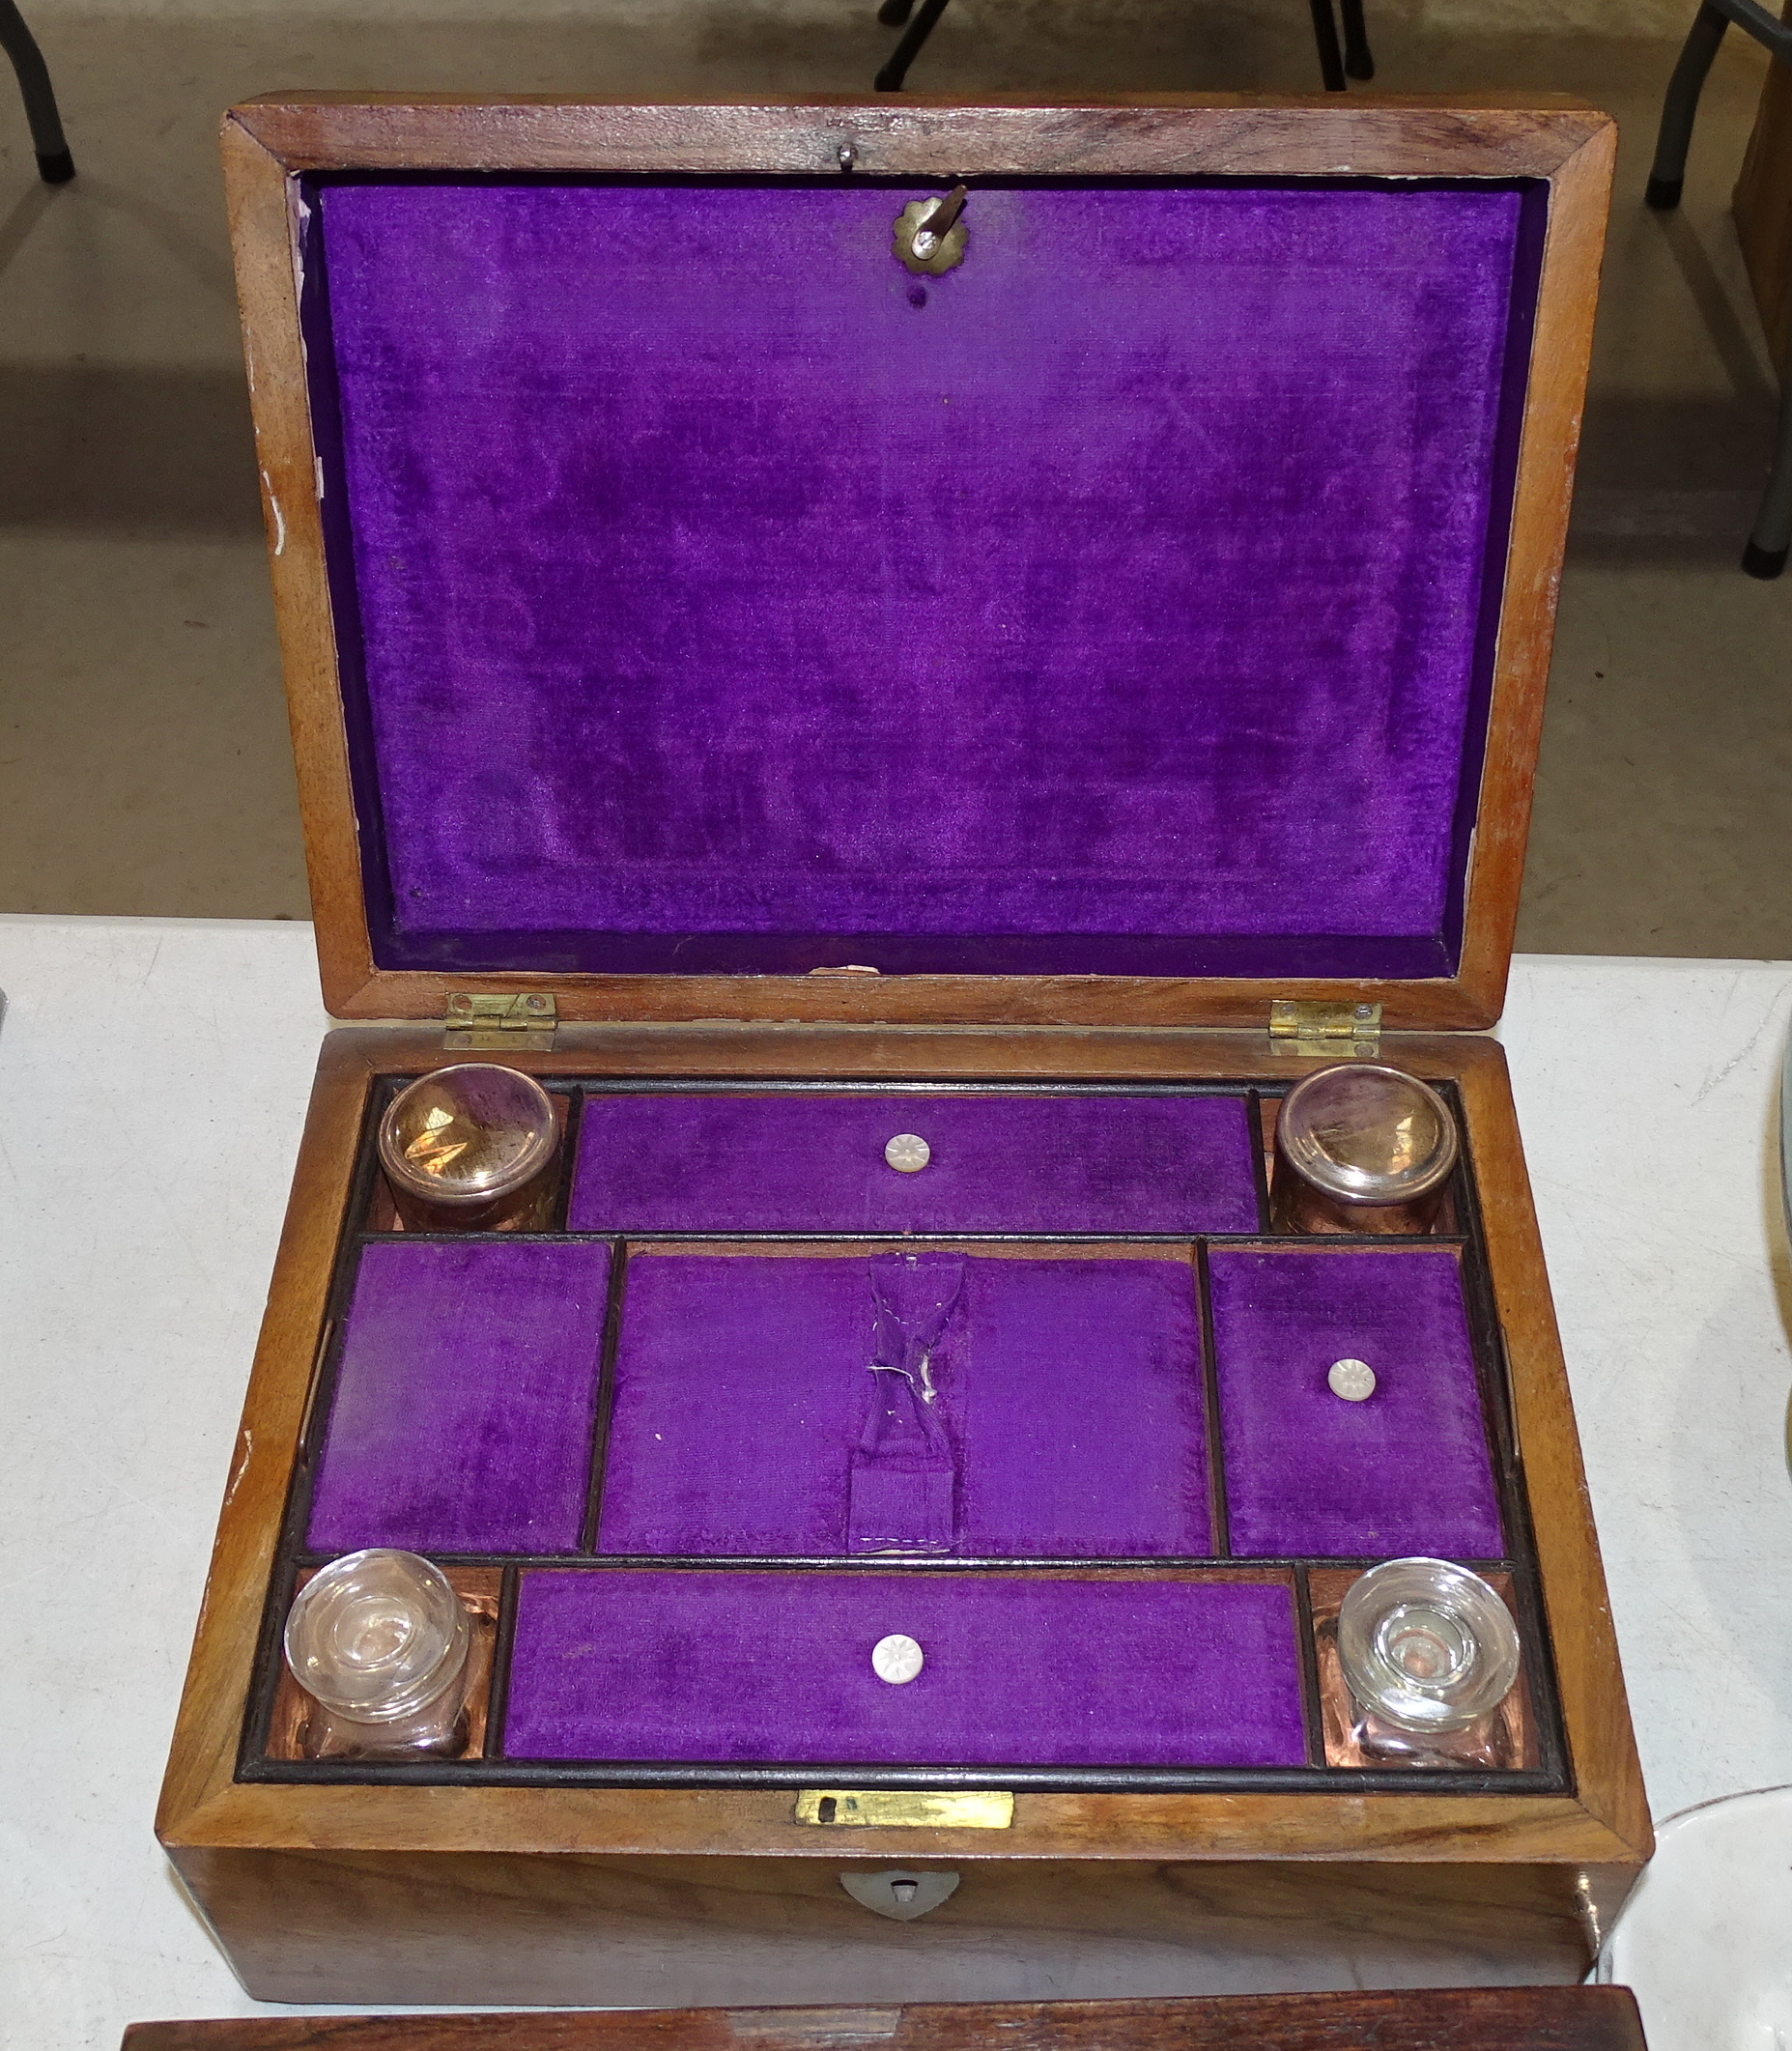 A 19th century rosewood tea caddy with interior cannister and glass mixing bowl, fitted with ring - Image 3 of 3